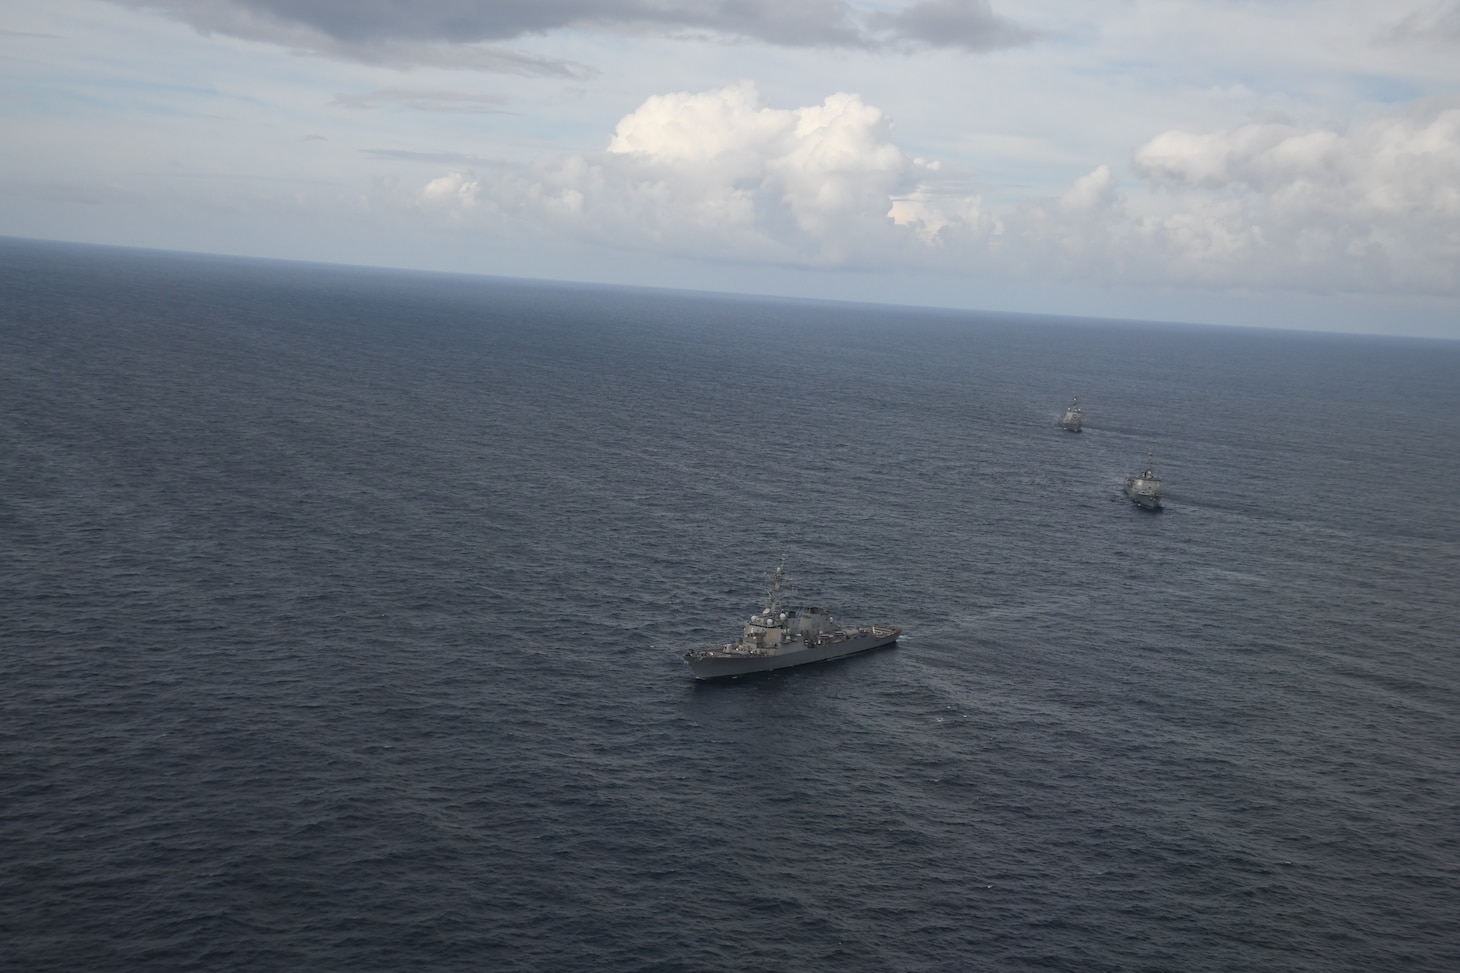 Japanese Maritime Self-Defense Force Maya-class guided missile destroyer Haguro (DDG-180); Arleigh Burke-class guided-missile destroyer USS Benfold (DDG 65); and Republic of Korea Sejong the Great-class destroyer Yulgok Yi (DDG-992) sail in formation during a trilateral exercise on Aug. 29.